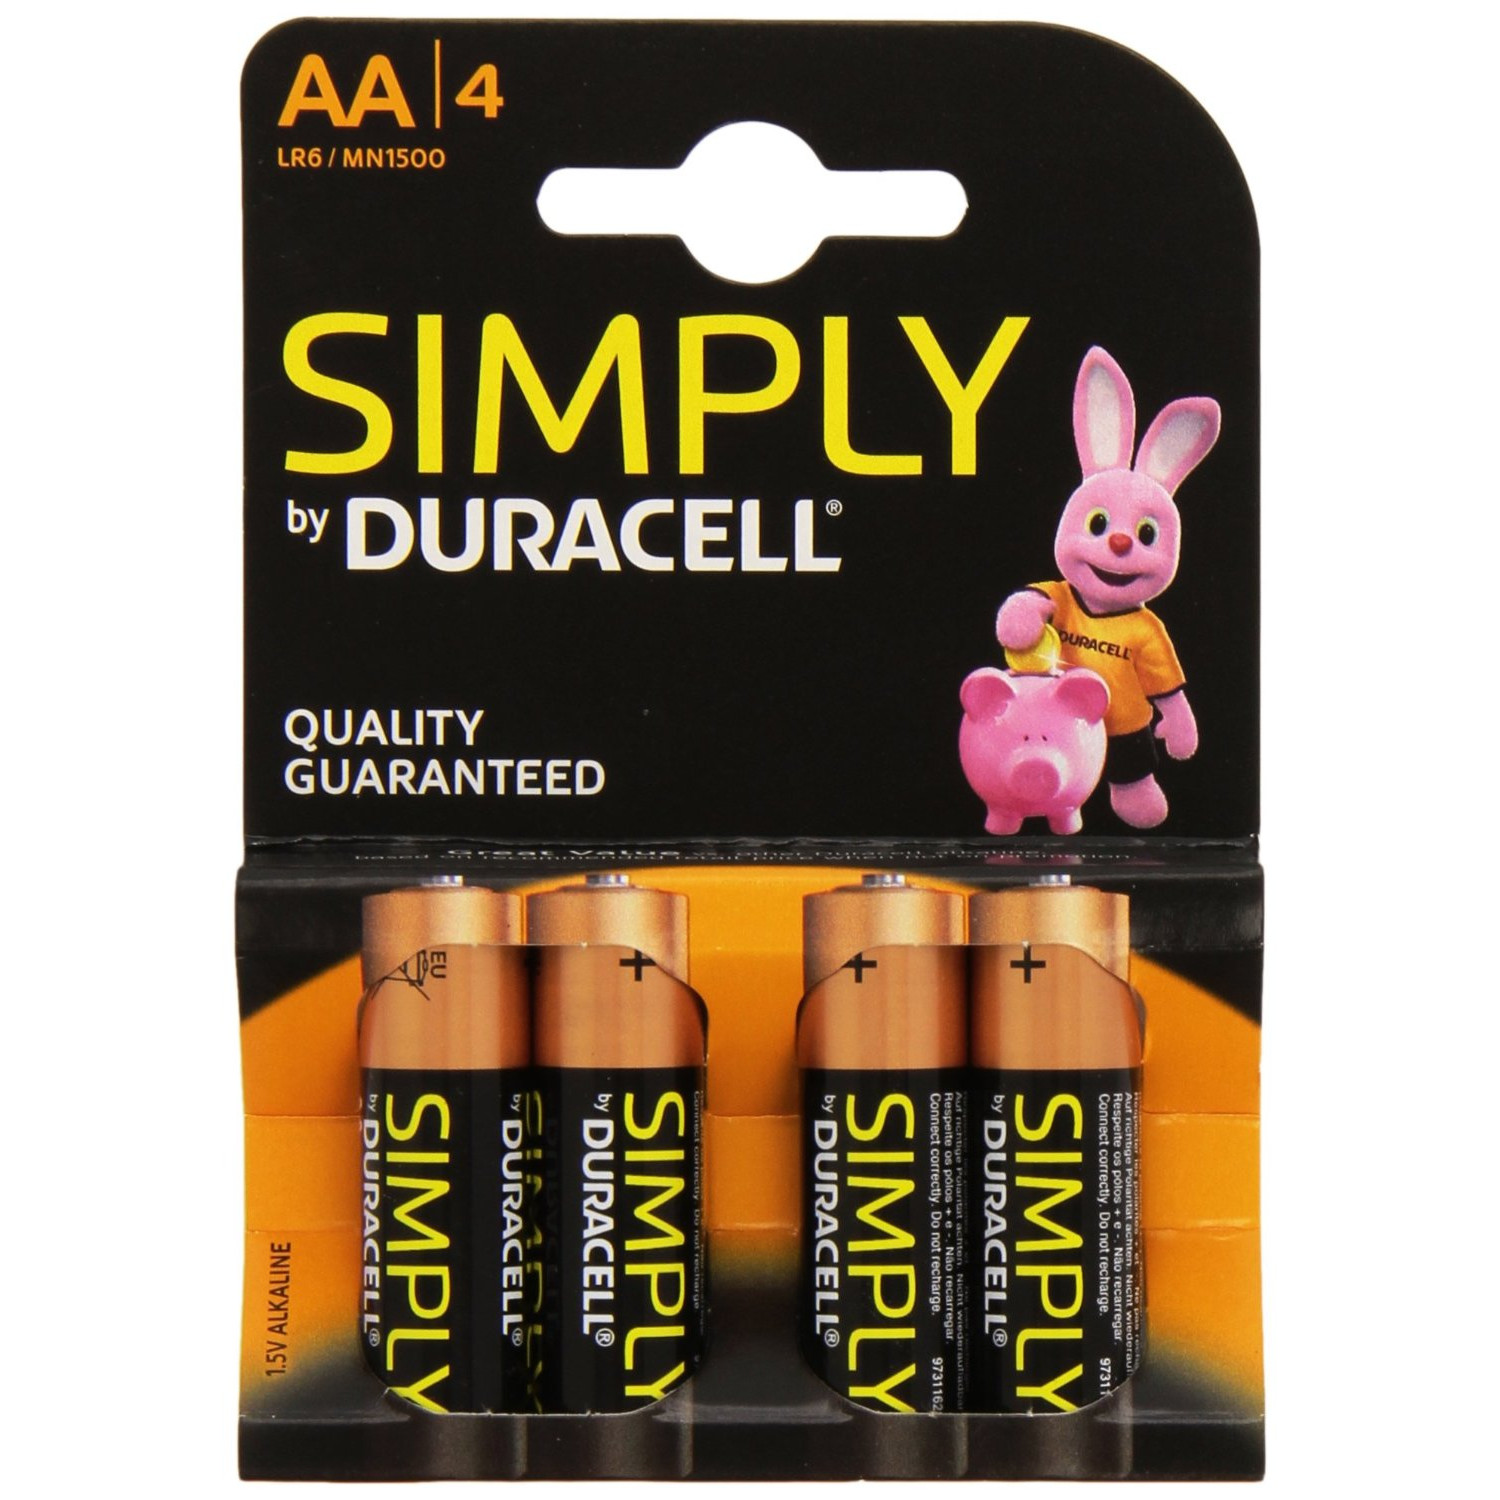 DURACELL SIMPLY ALKALINE AA/4